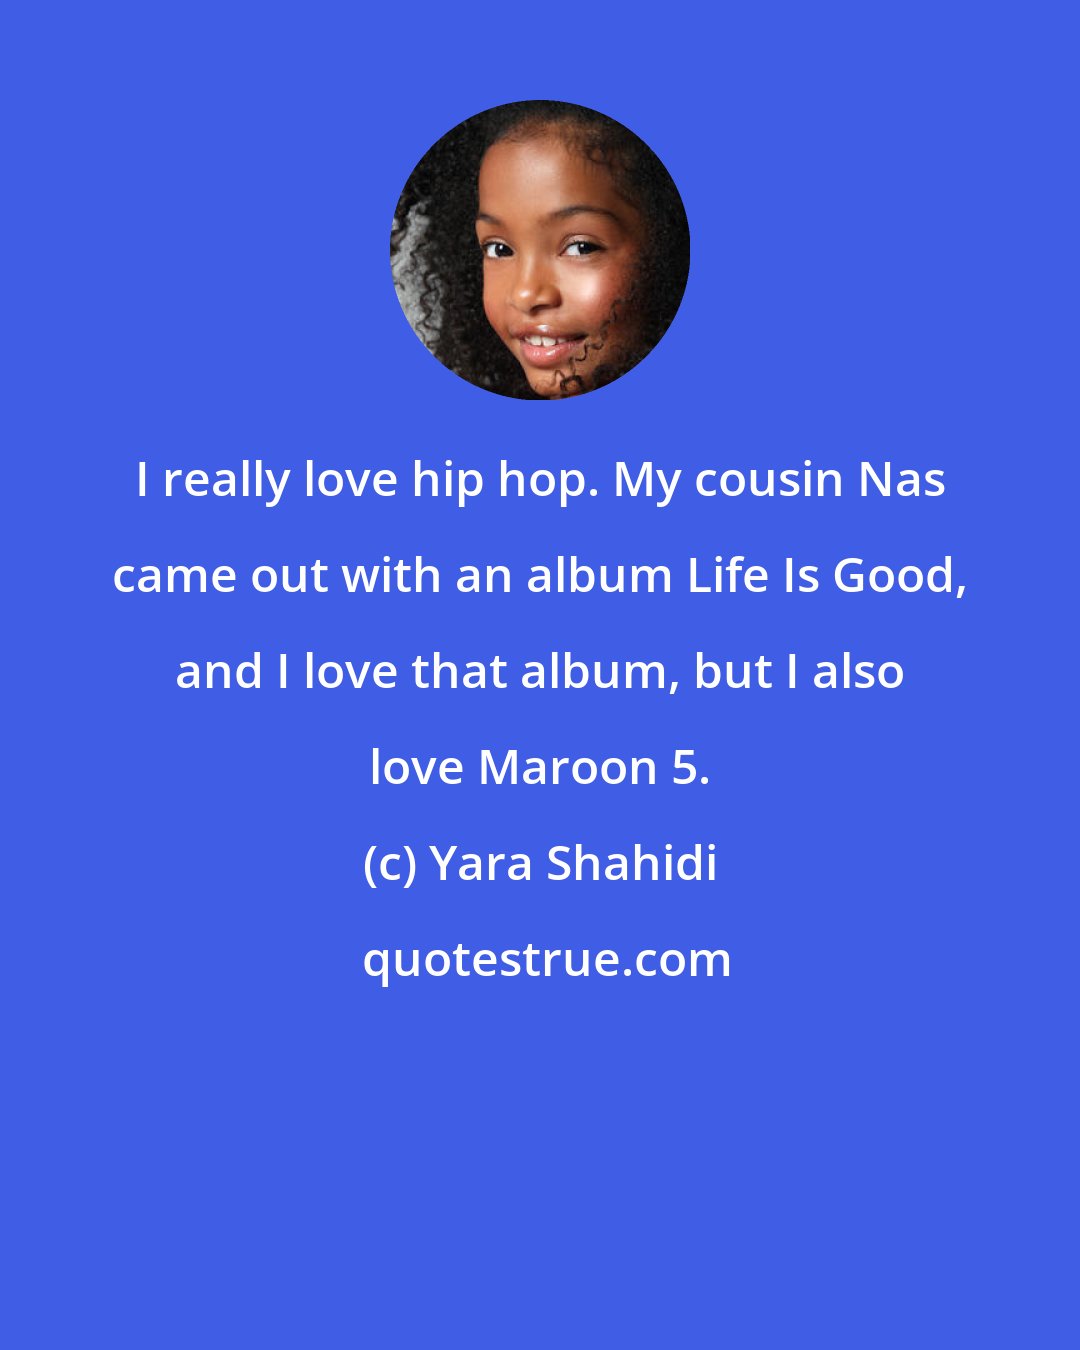 Yara Shahidi: I really love hip hop. My cousin Nas came out with an album Life Is Good, and I love that album, but I also love Maroon 5.